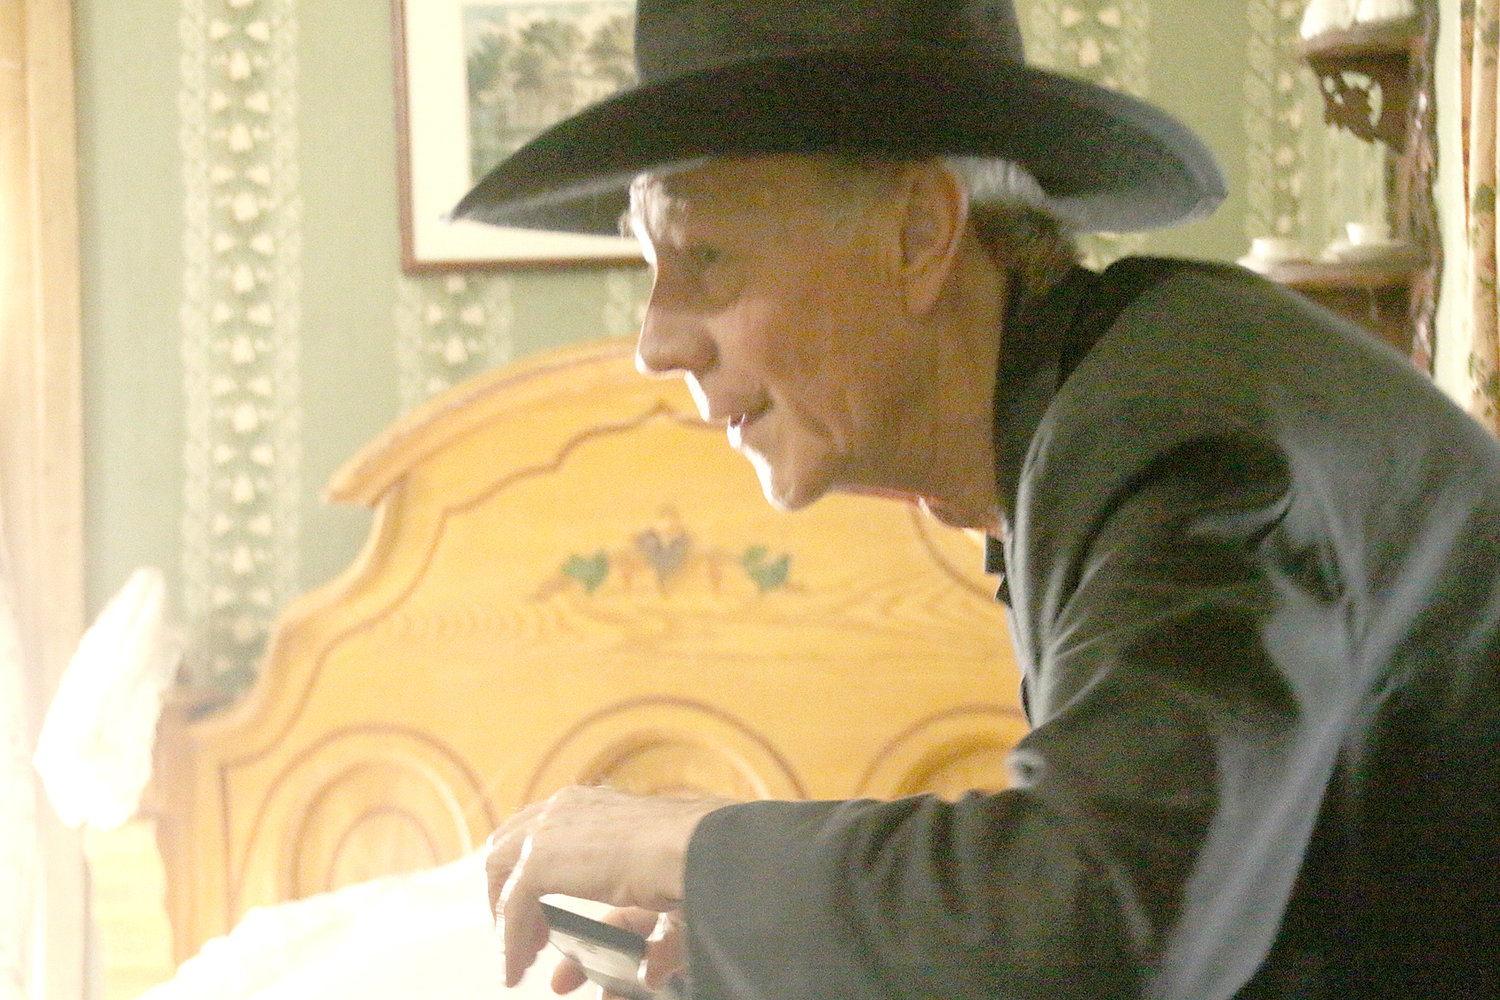 Allan Cody snaps a photo in a Cody Homestead bedroom.